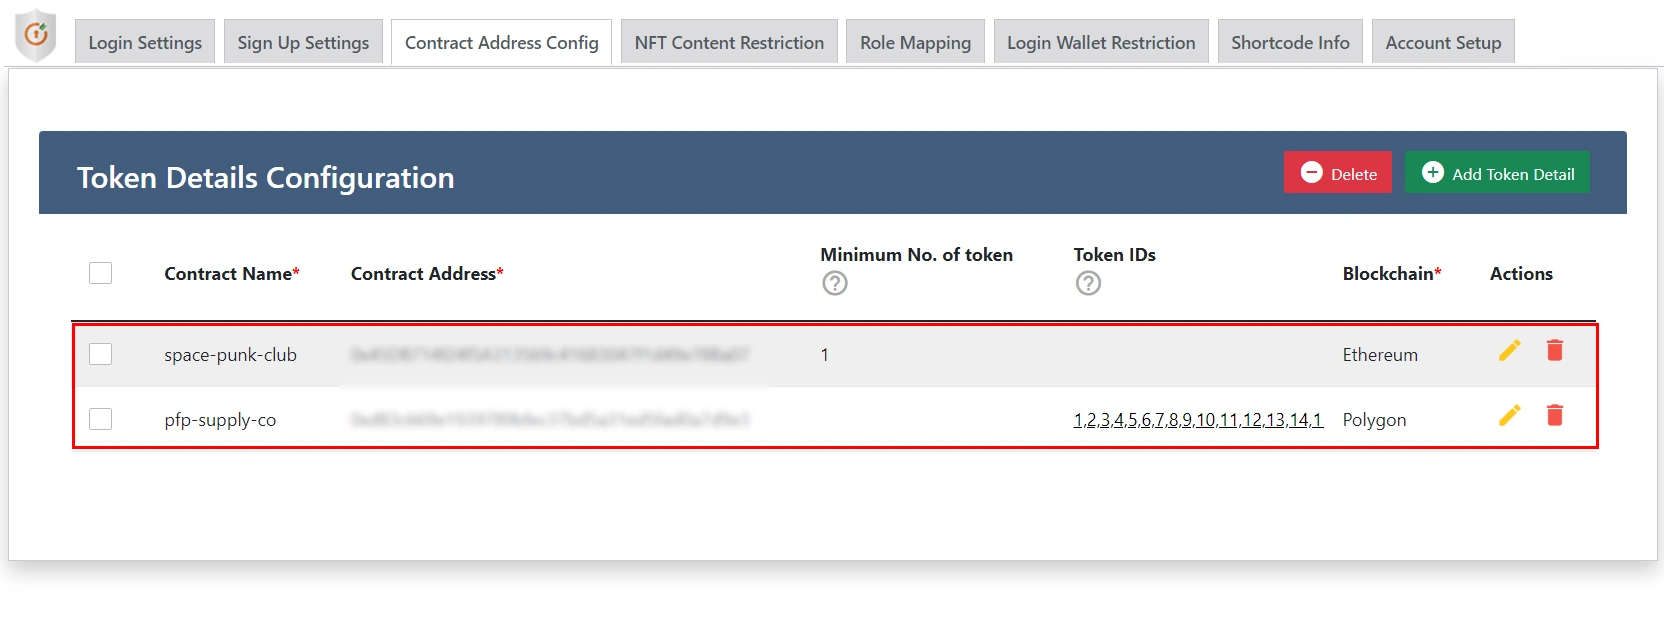 WP Web3- NFT Token Gating added details successfully